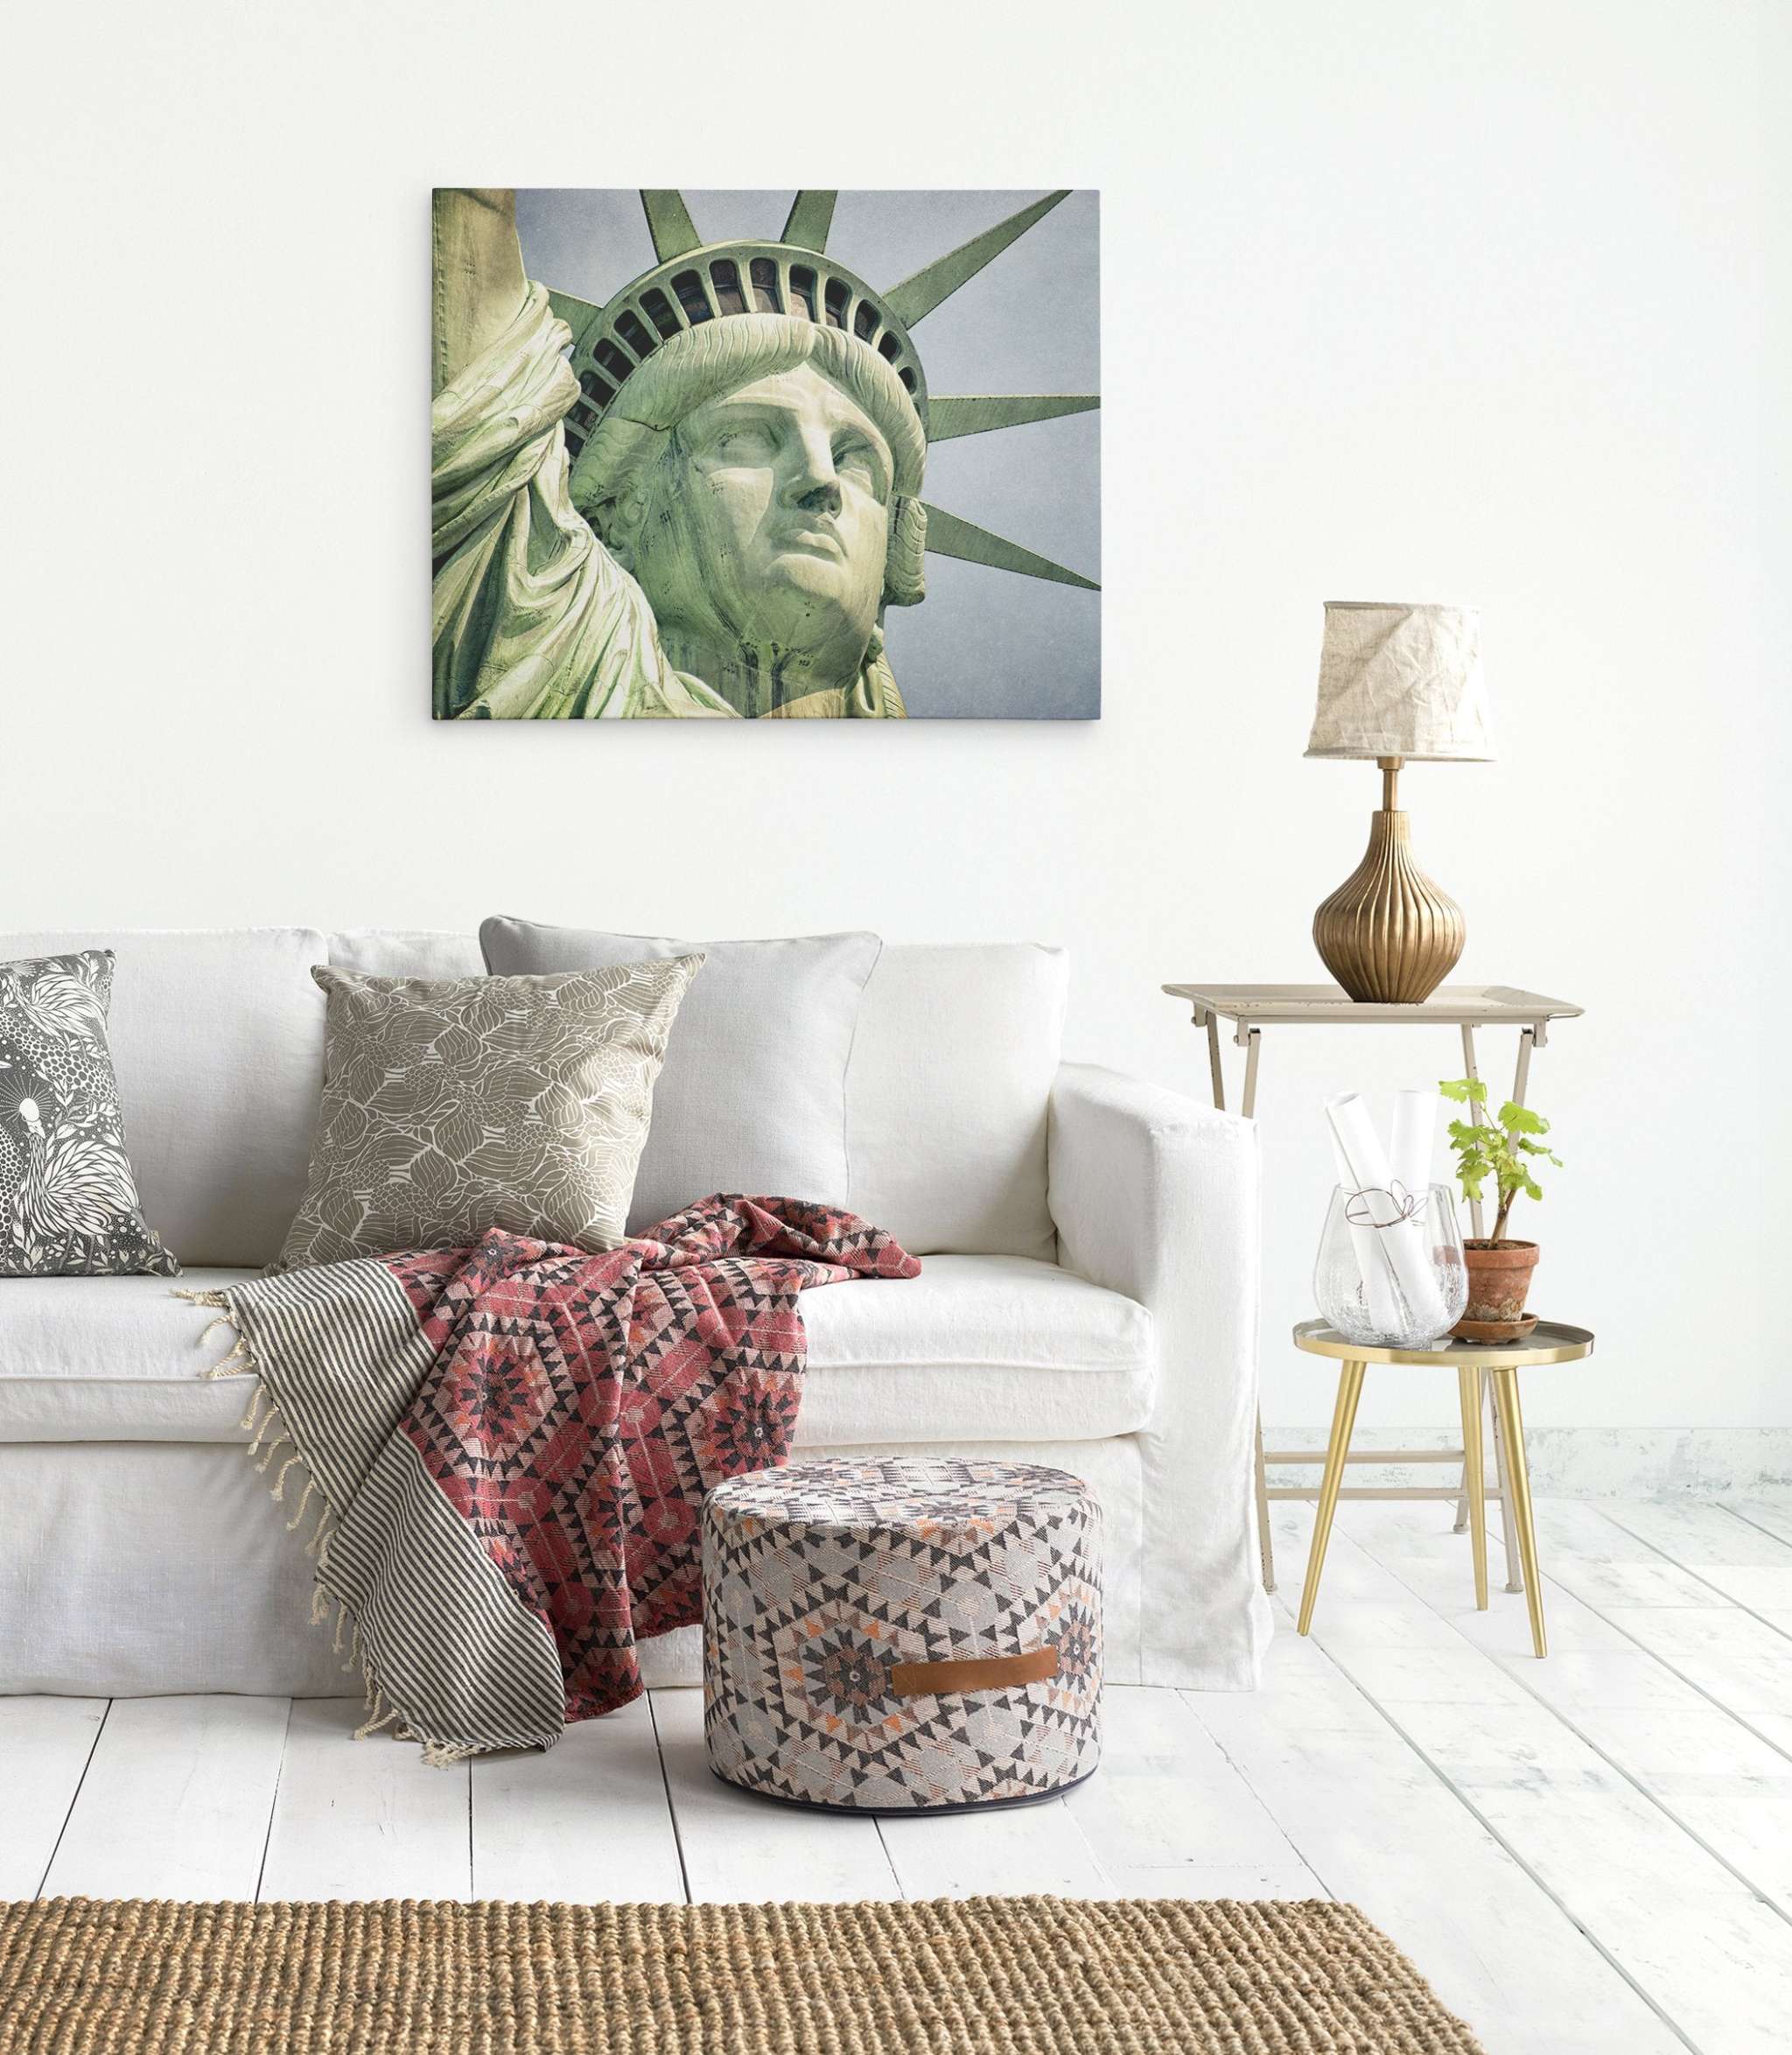 A bright, modern living room with a white sofa adorned with patterned cushions and a colorful throw blanket. Above the sofa, a framed picture of Offley Green's New York City Canvas Wall Art, 'Face of Liberty' on premium artist-grade canvas adds a sophisticated touch. A side table holds a lamp, small plant, and an open book. A patterned ottoman sits on the floor.